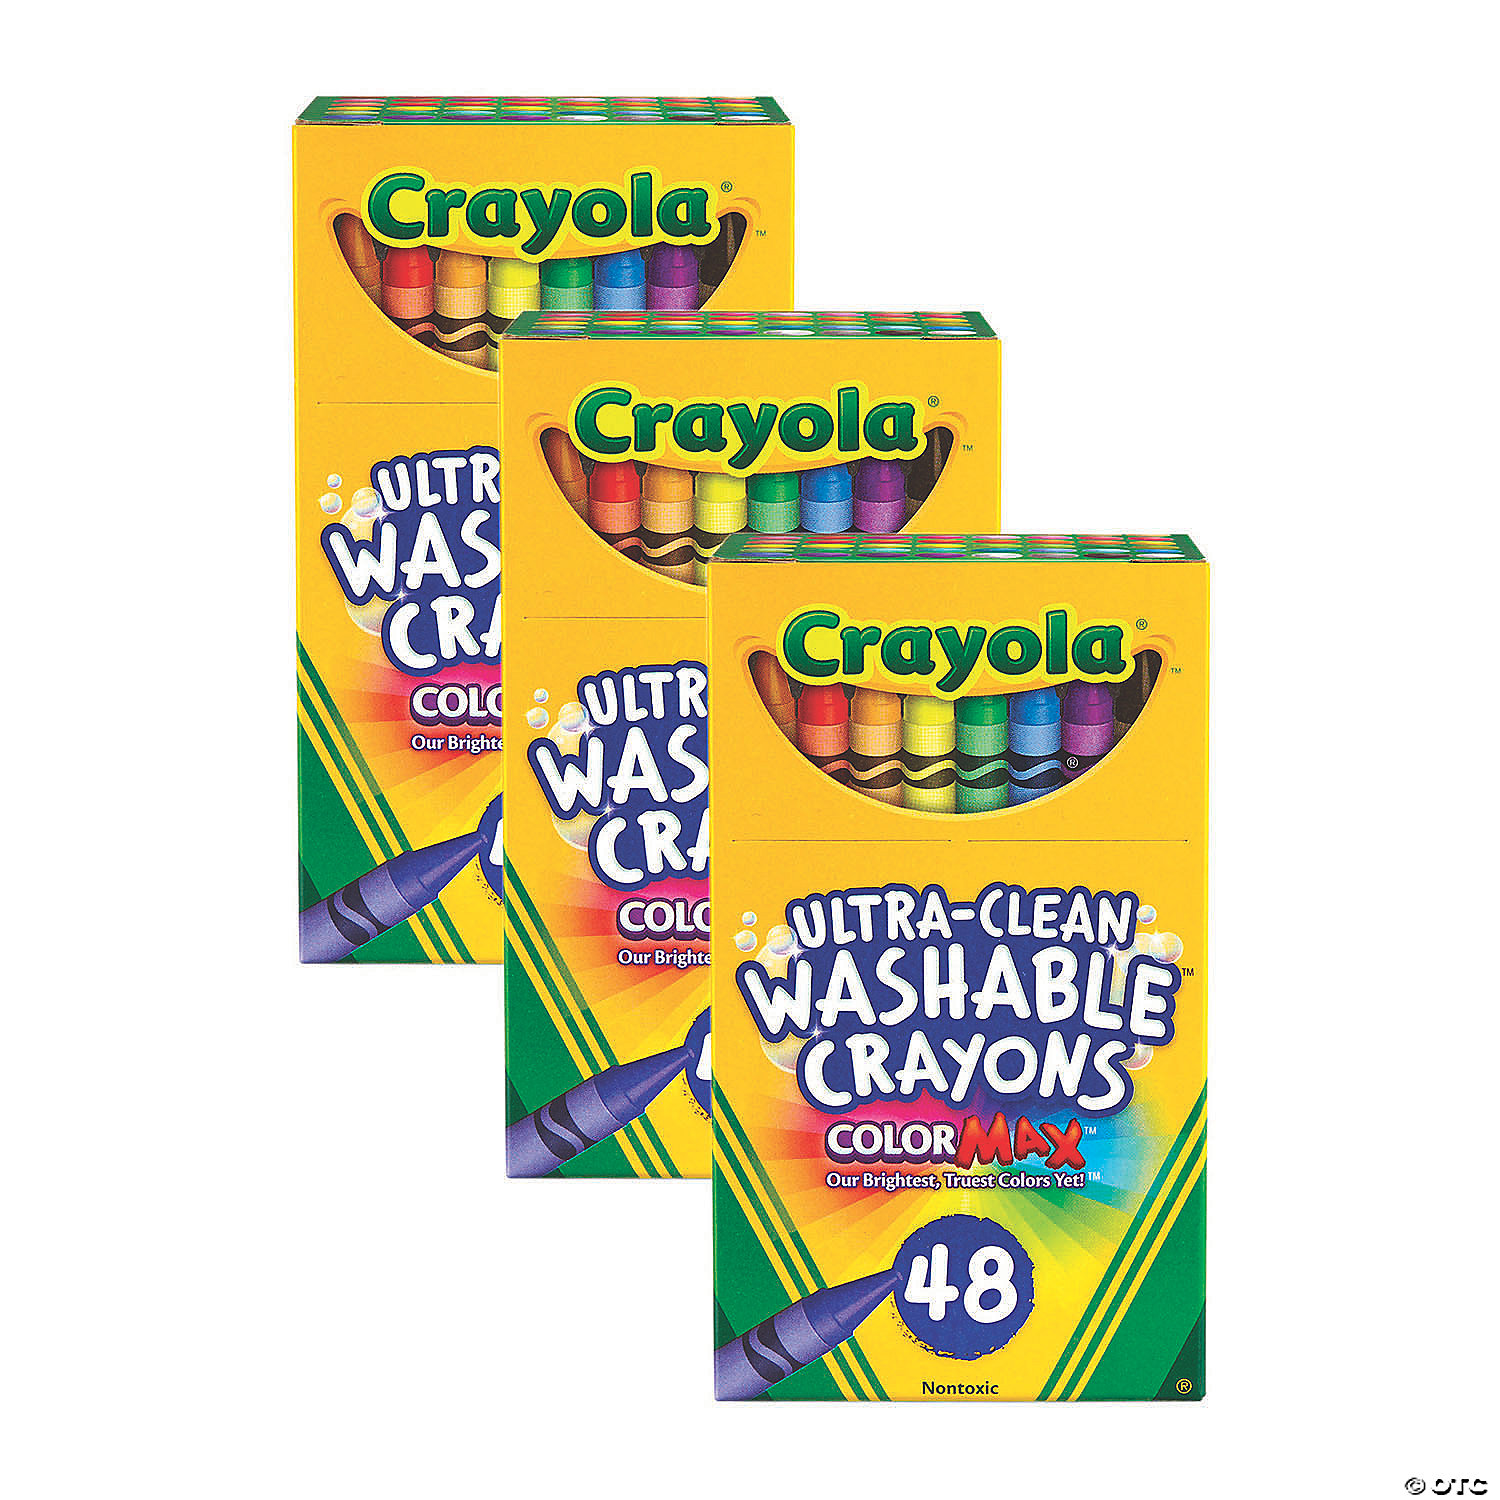 Crayola Ultra-Clean Markers, Broad Line, Assorted Colors, 12 per Box, 3 Boxes | BIN587812-3